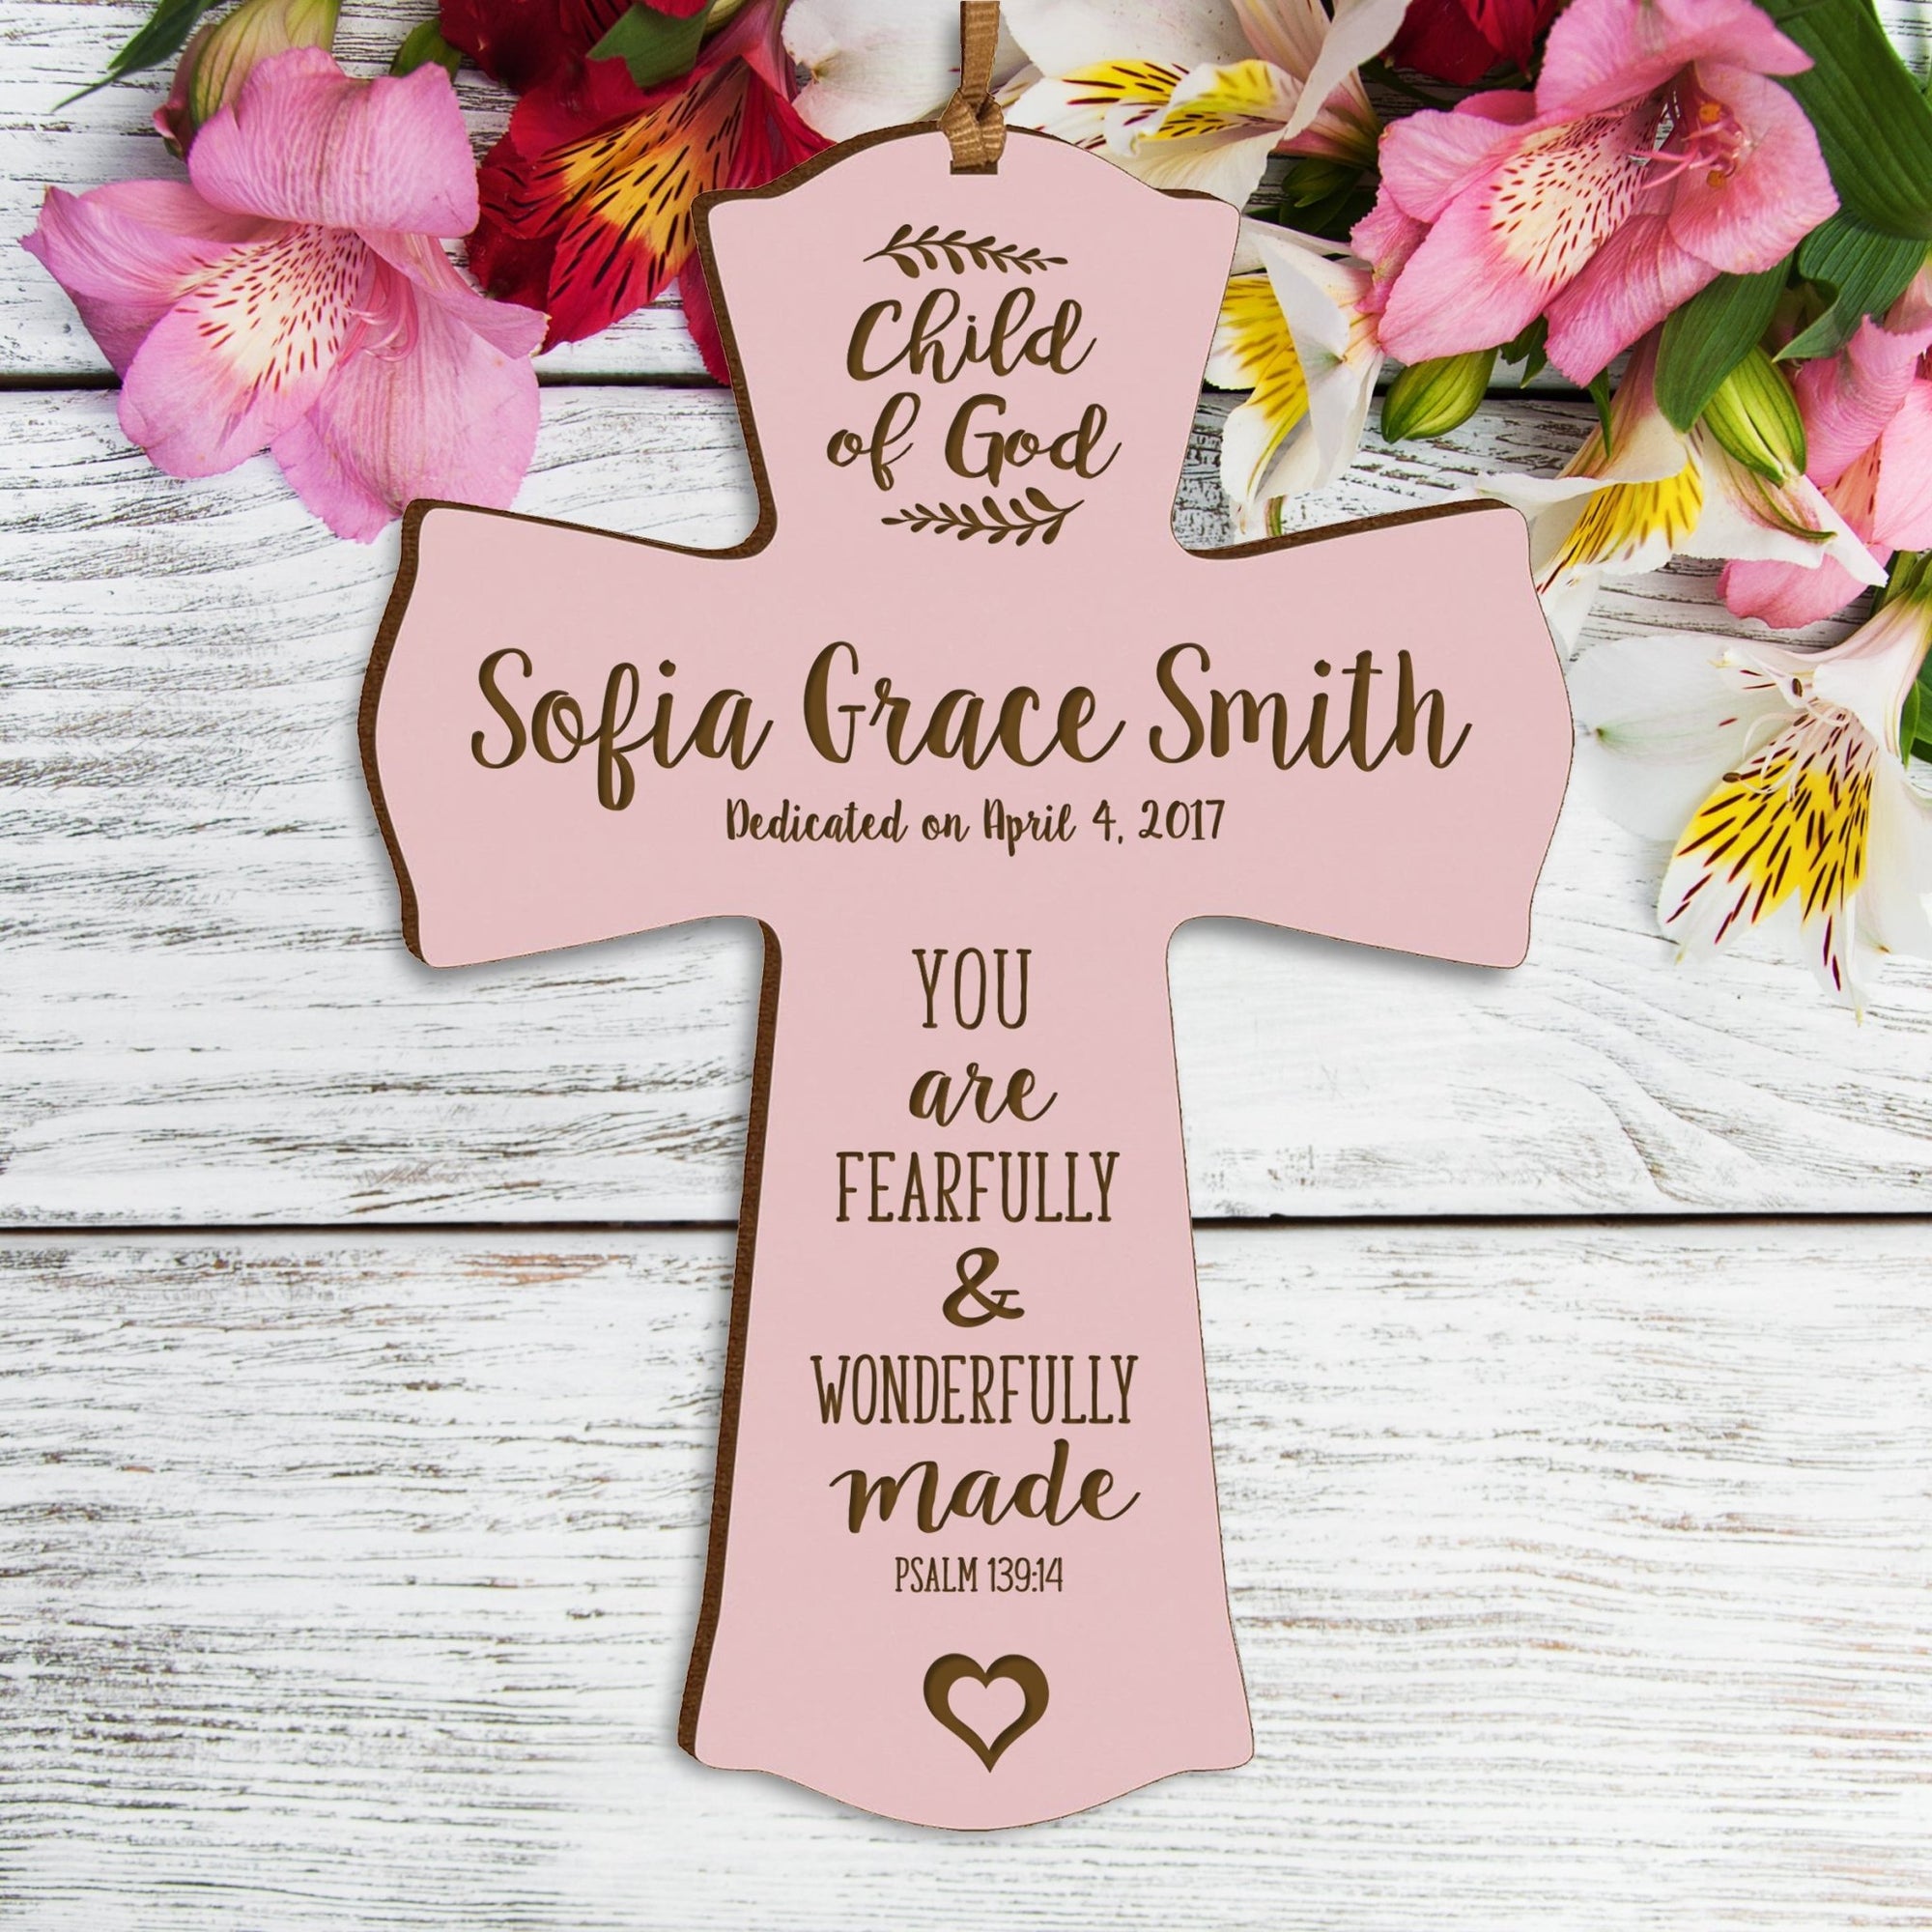 Personalized Baptism Cross Ornament - Fearfully & Wonderfully - LifeSong Milestones